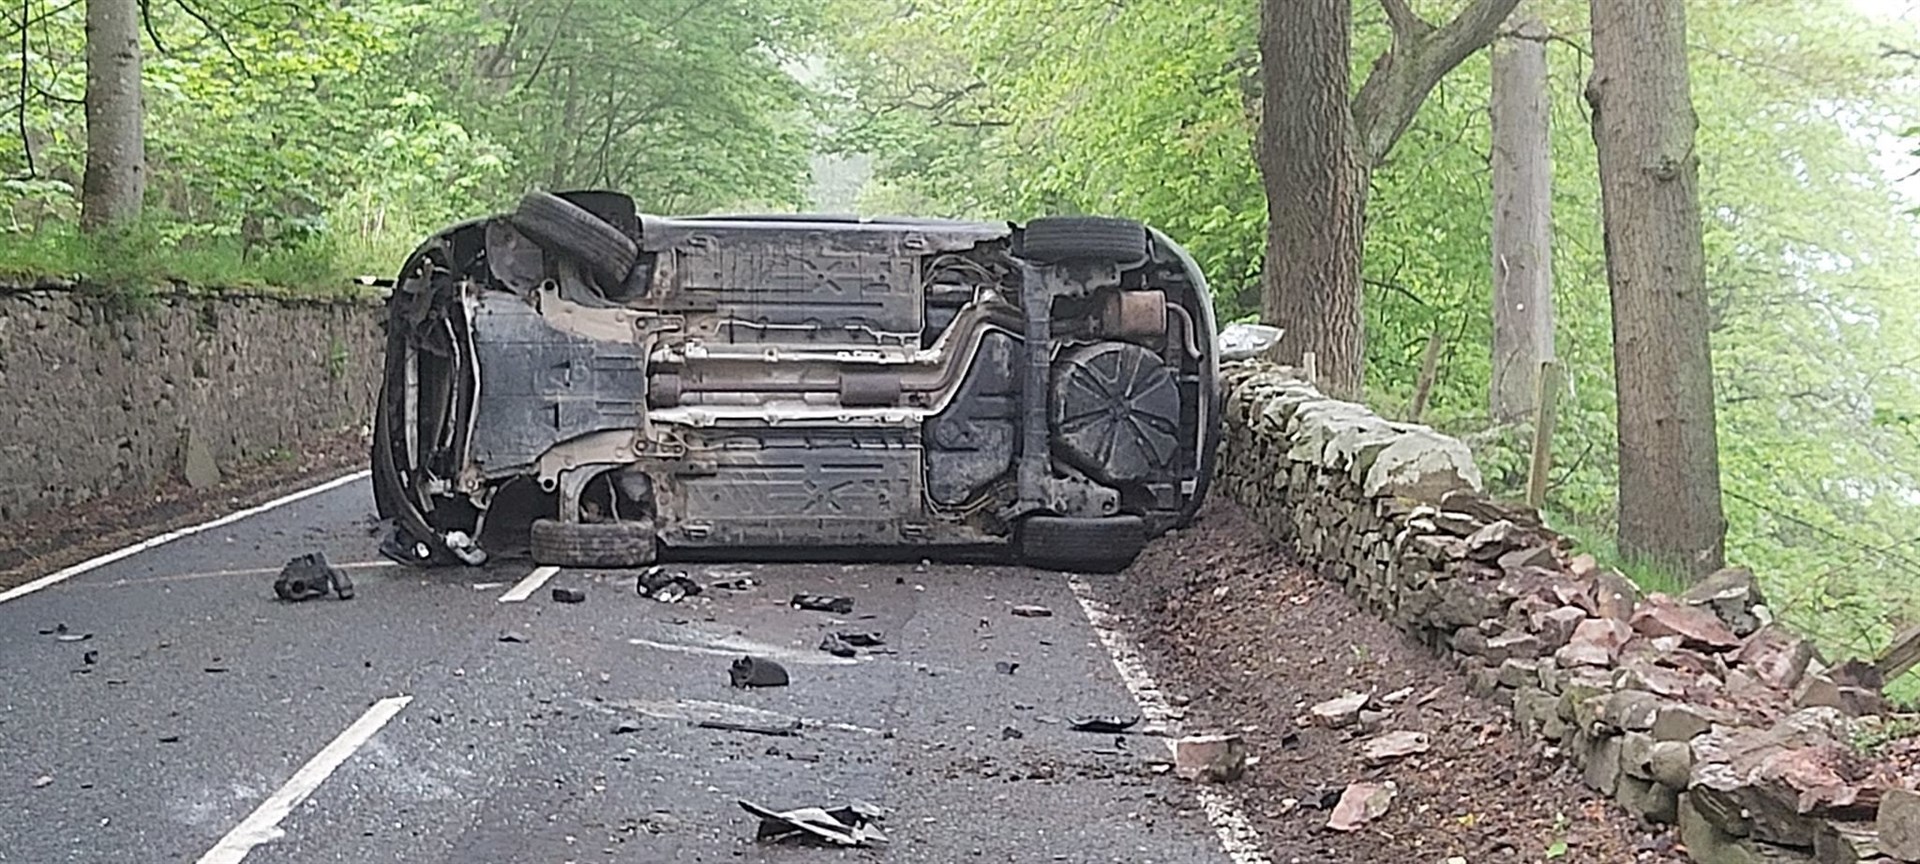 The driver had a lucky escape on the B862 Inverenss to Dores road